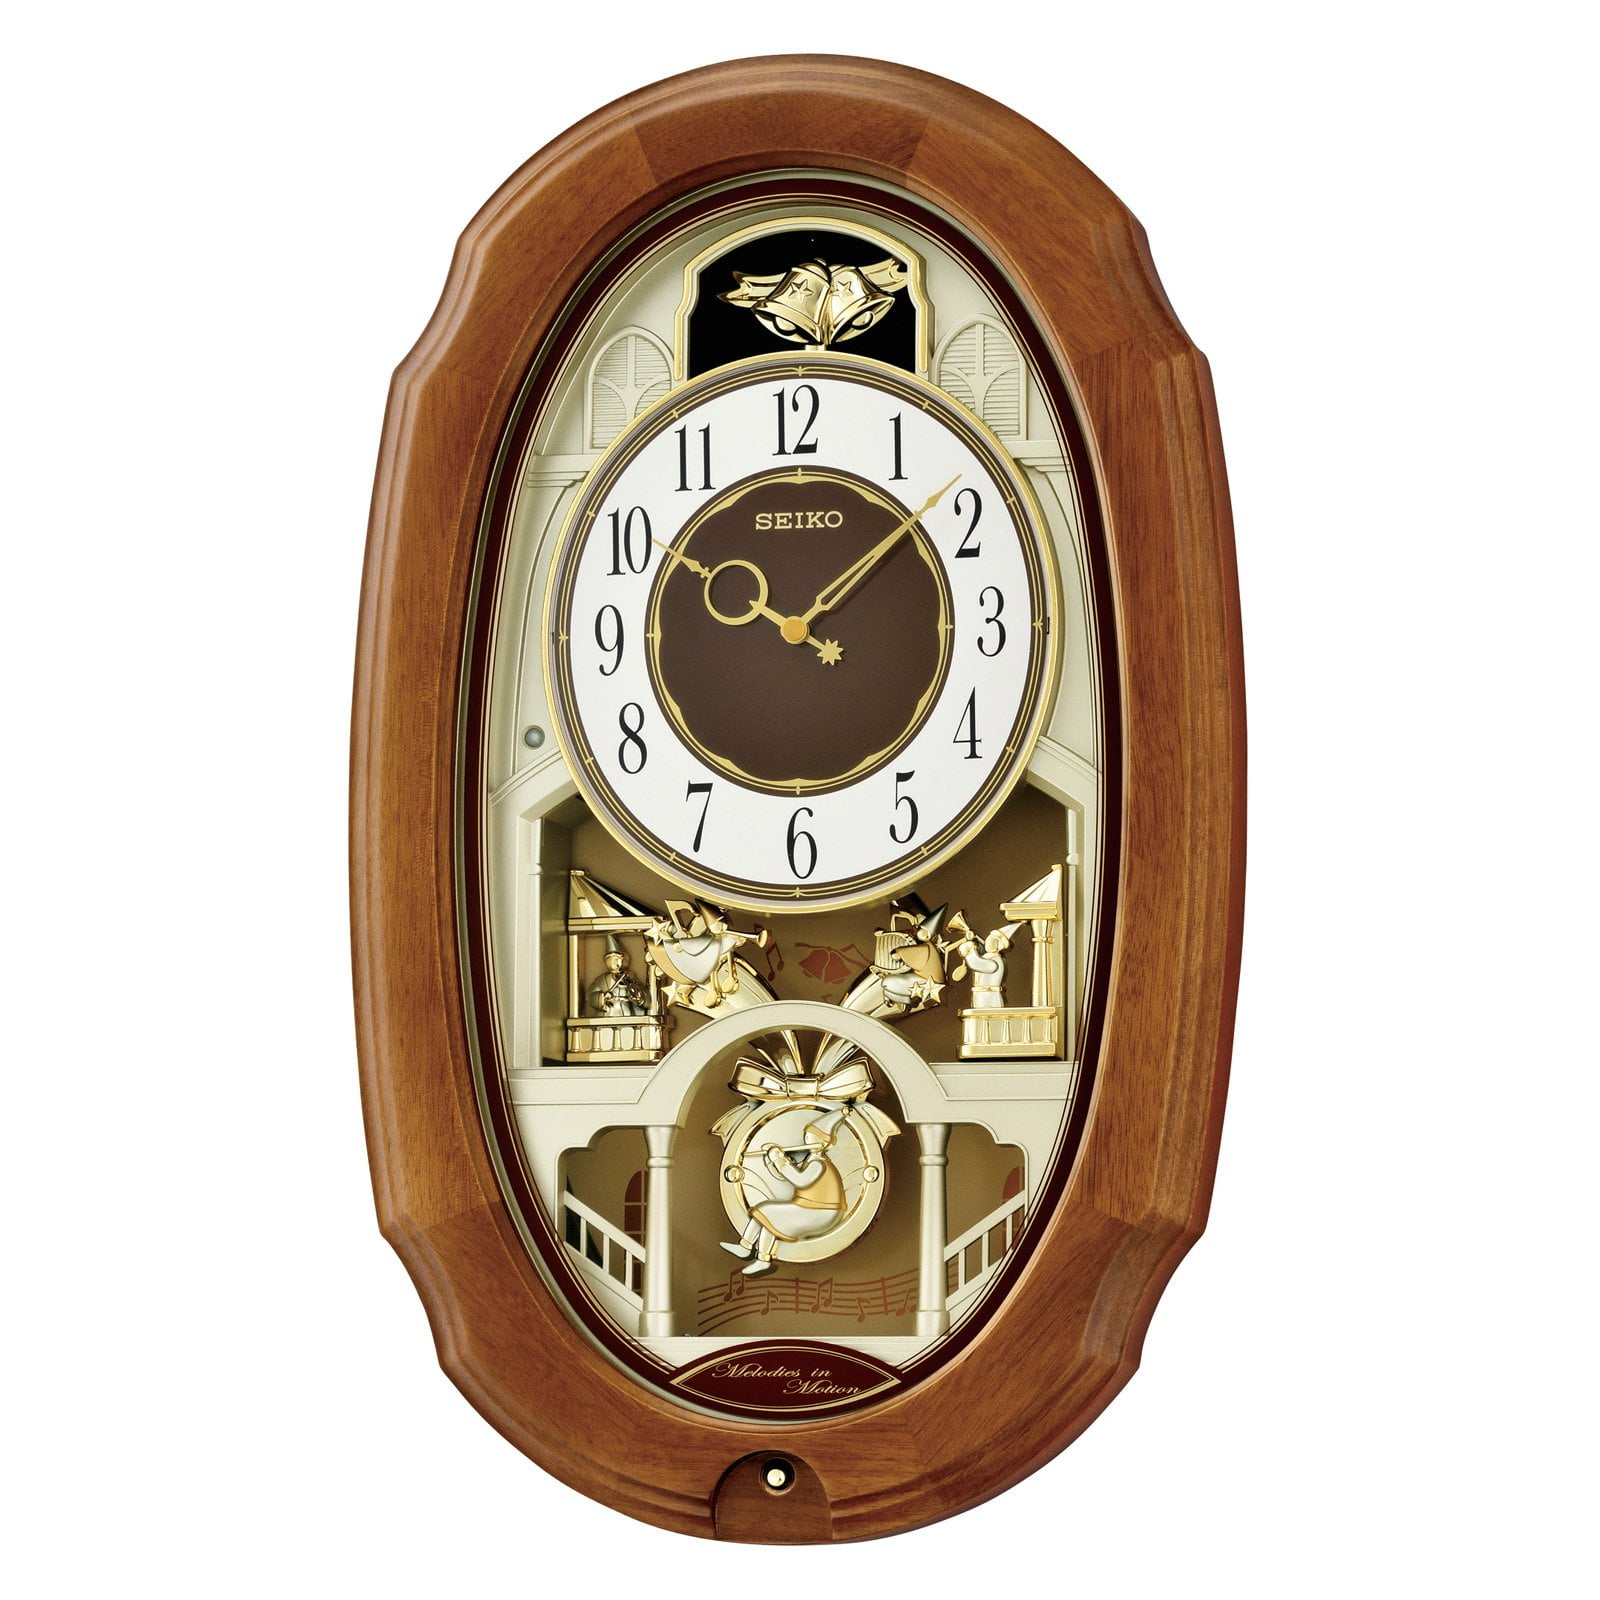 Seiko Town Square Melodies in Motion Wall Clock - 11 in. Wide 